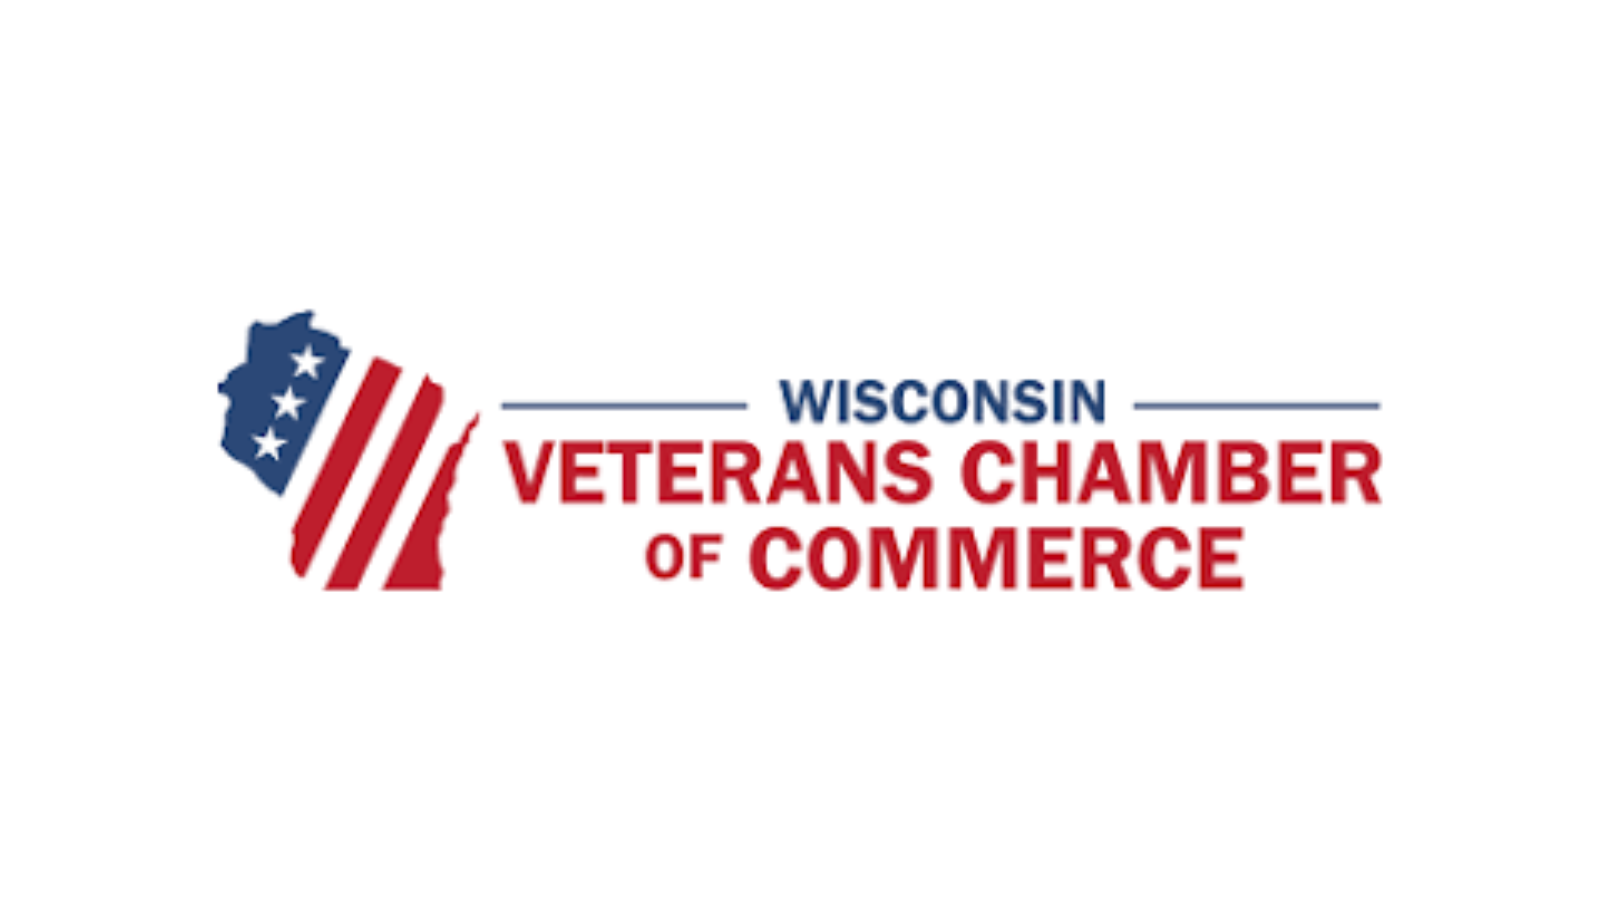 Wisconsin Veterans Chamber connects vets and business